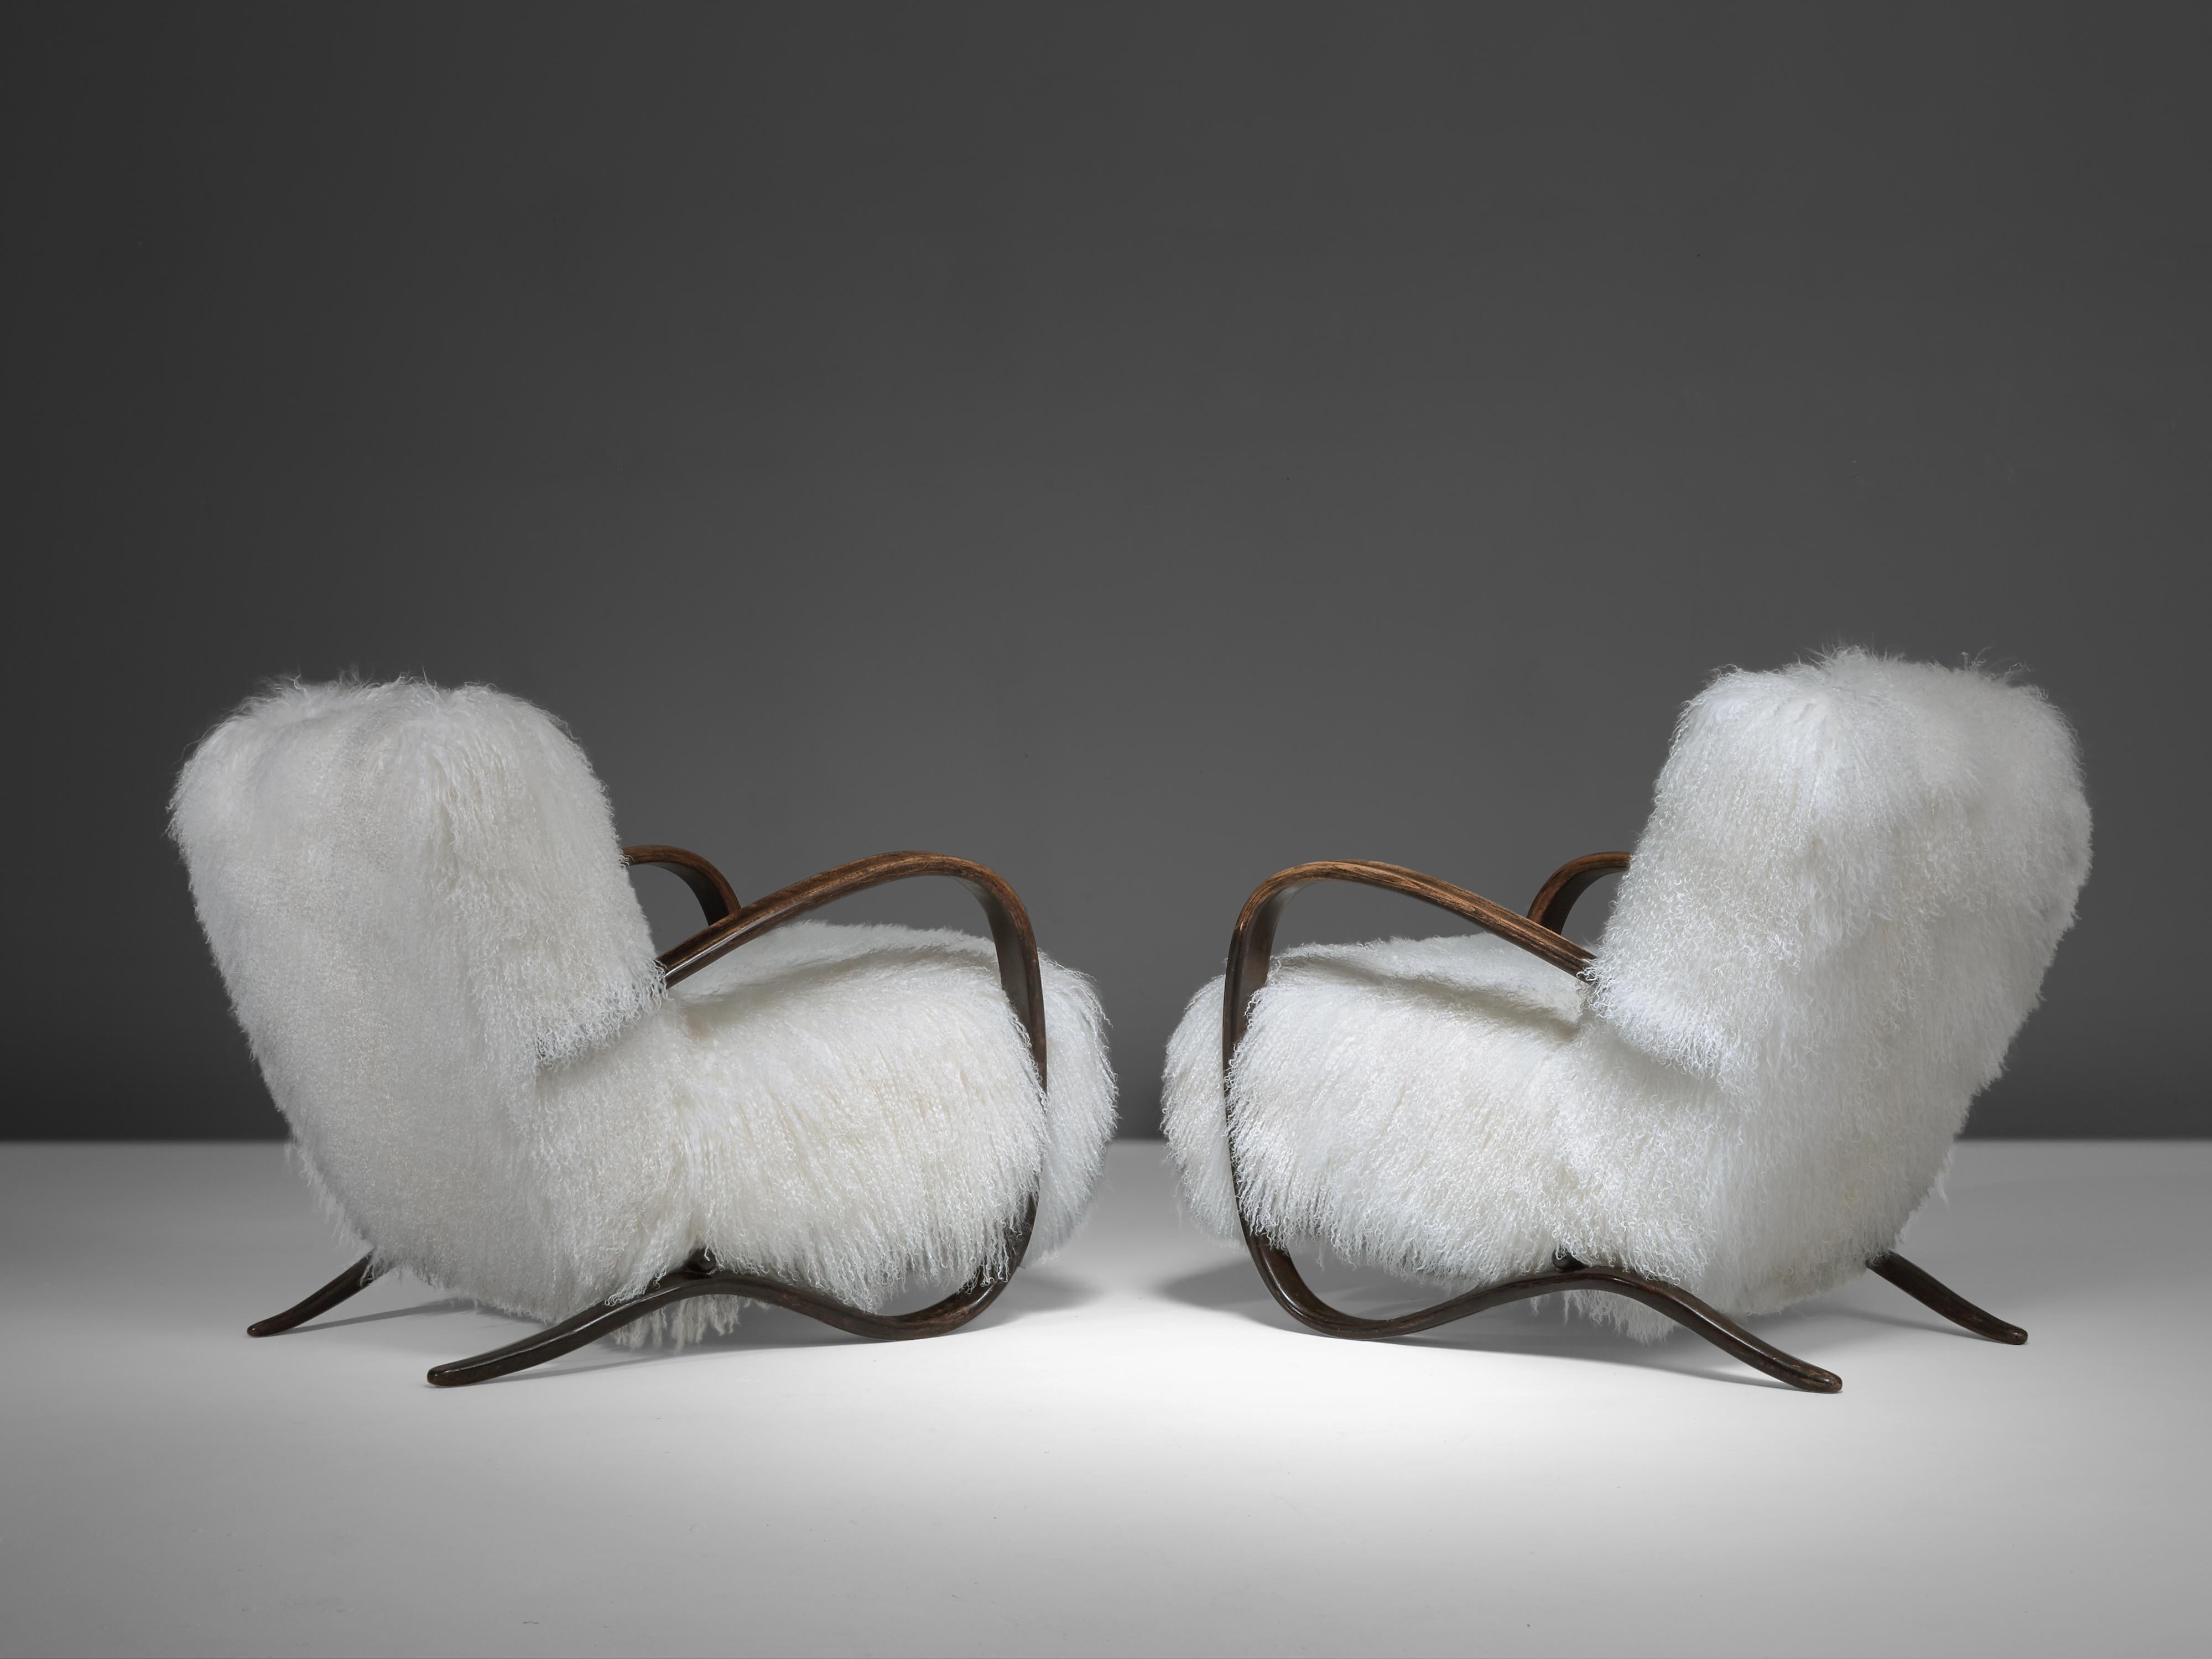 Jindrich Halabala, customizable lounge chairs, beech, Tibetan wool, Czech Republic, 1930s

Extraordinary easy chairs with white Tibetan lamb’s wool upholstery. These chairs have a very dynamic and abundant appearance and the fuzzy upholstery gives